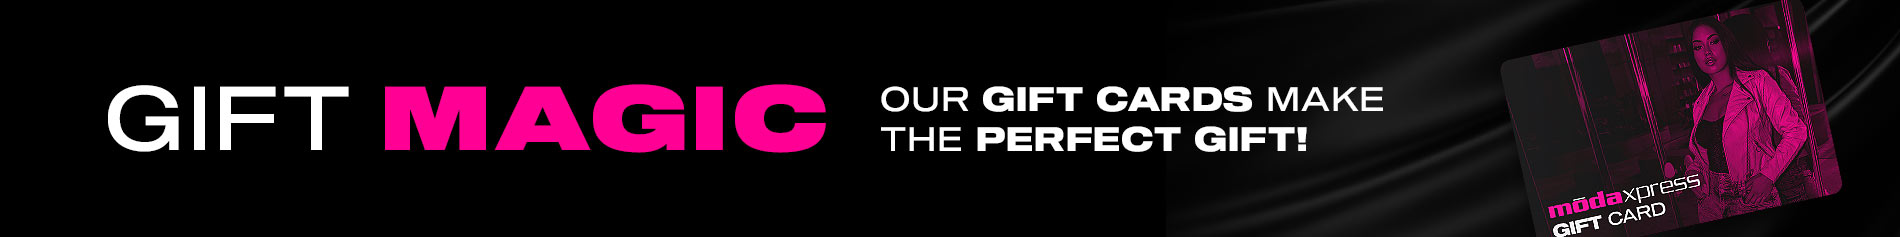 Gift Magic: Our Gift Cards Make The Perfect Gift